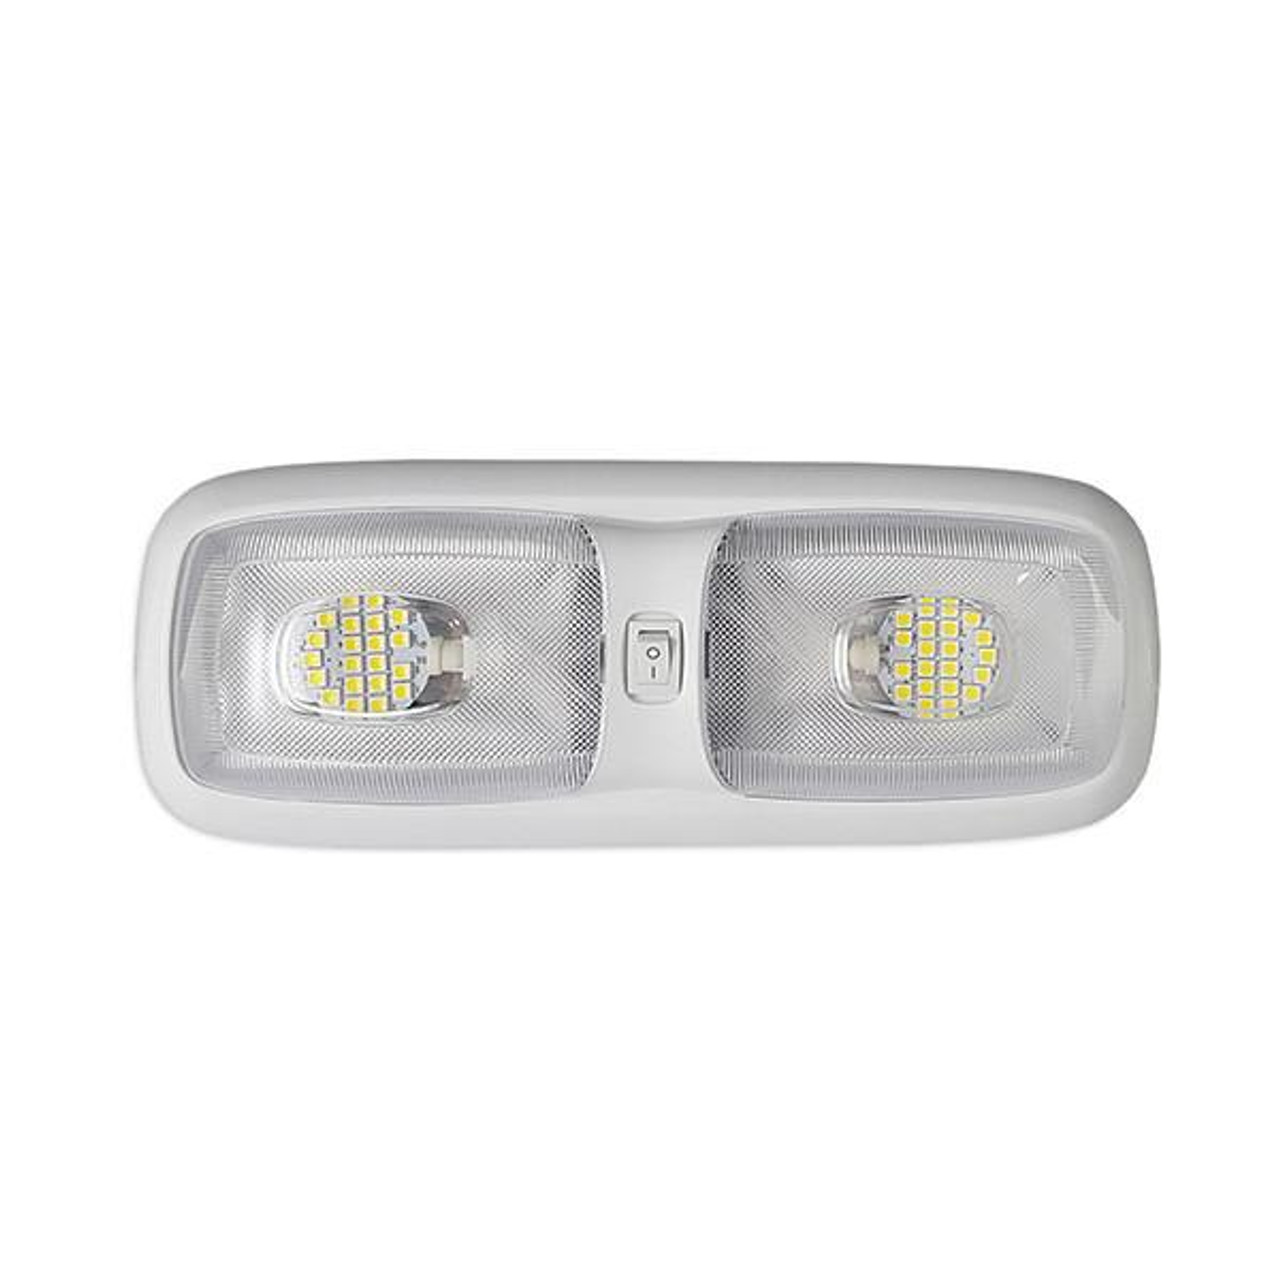 Whirlpool brydning grænseflade Double Dome Interior RV LED Light- 3200K Warm White - RecPro